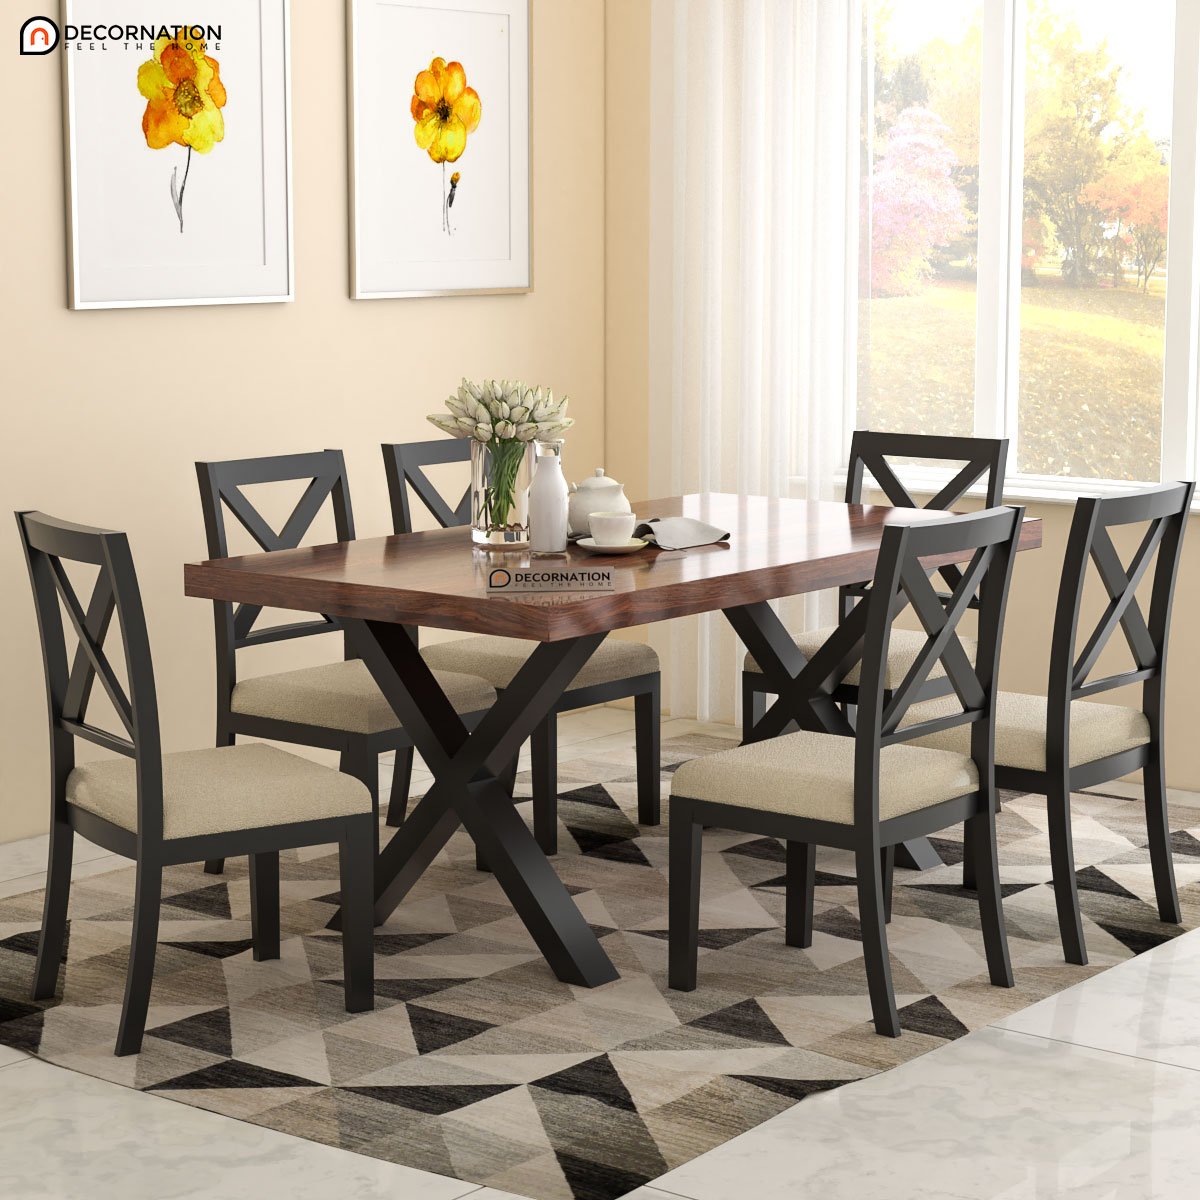 Ion Wooden 6 Seater Dining Table Set